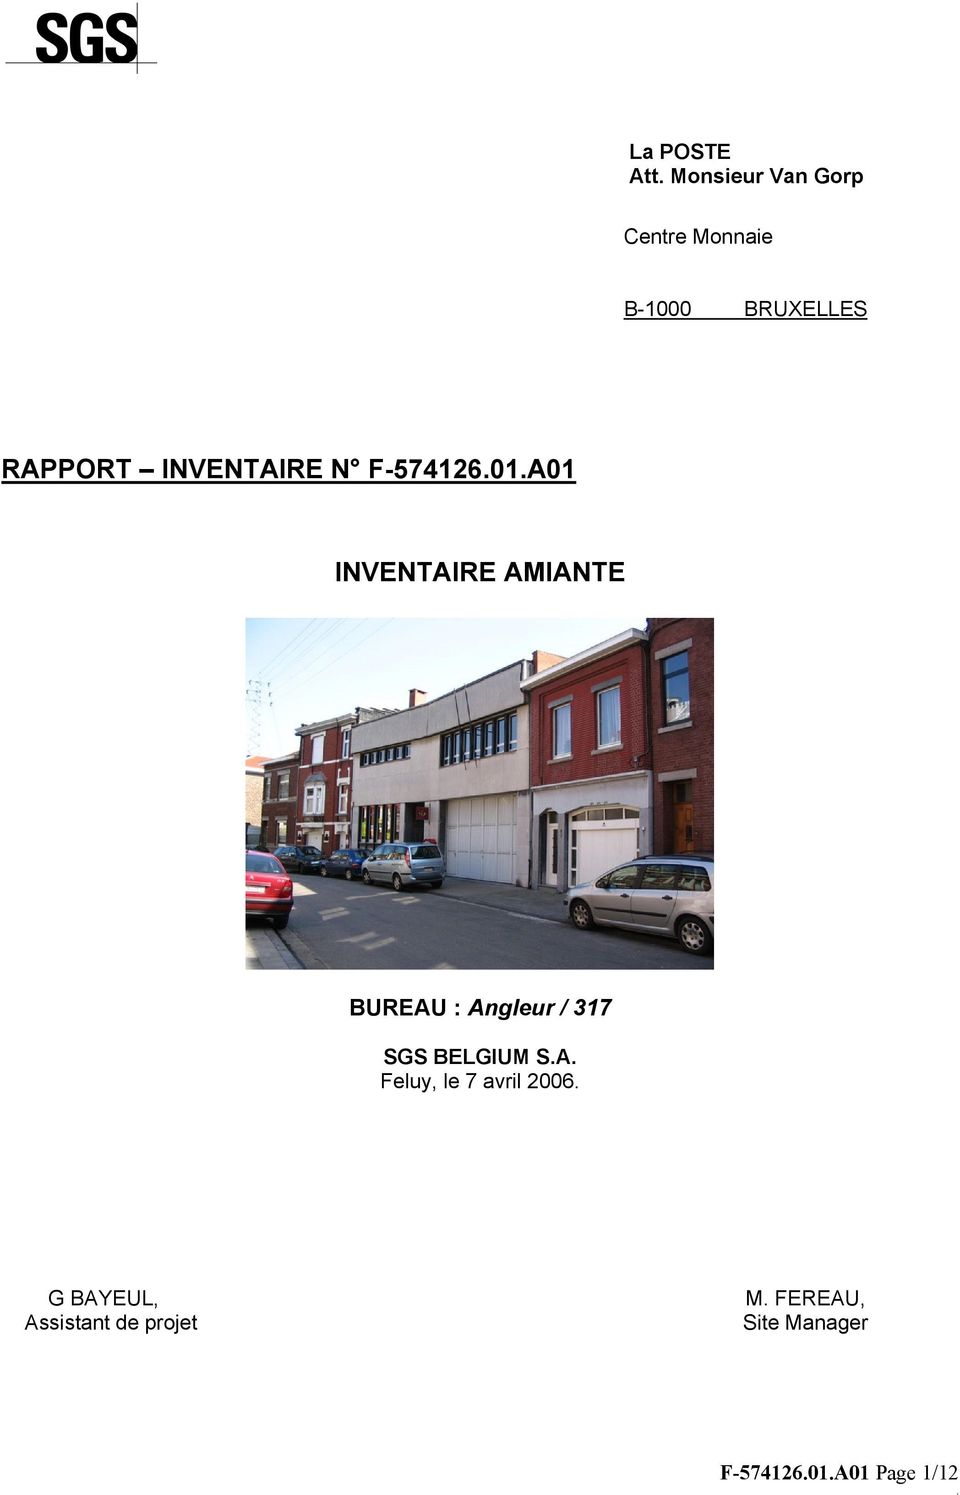 INVENTAIRE N F-574126.01.